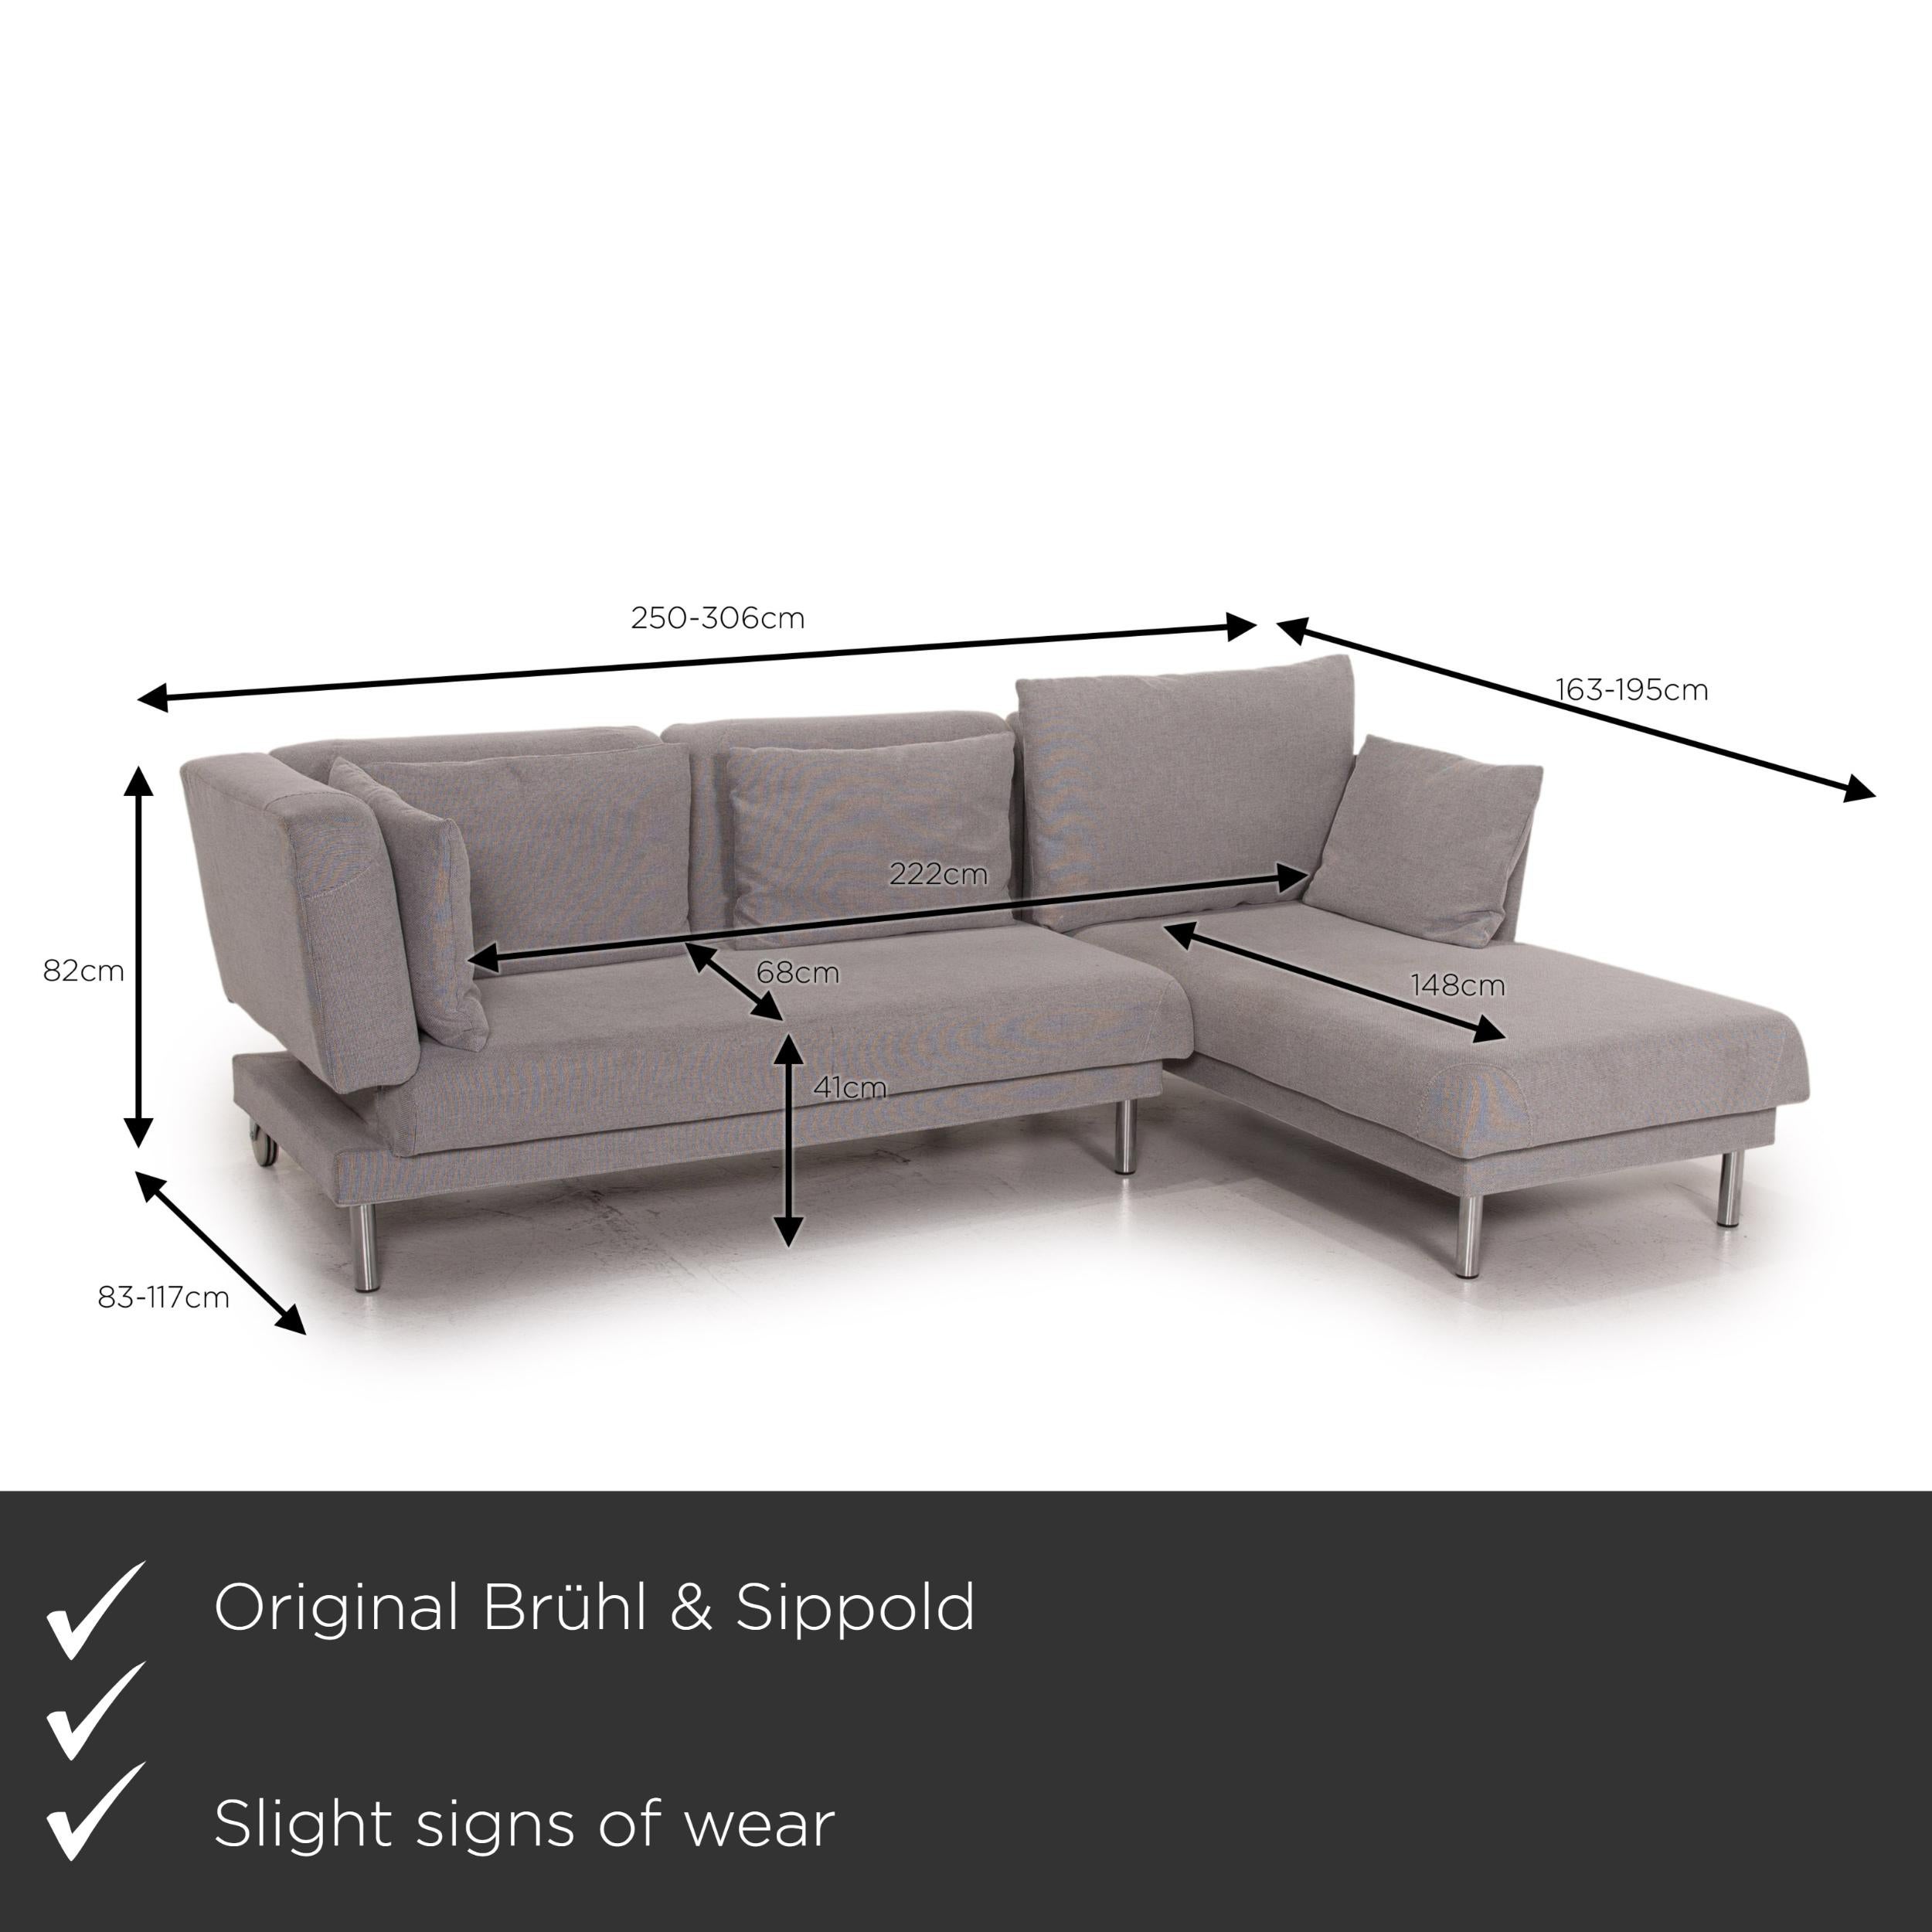 We present to you a Brühl & Sippold Tam corner sofa gray fabric living area cushion.

 

 Product measurements in centimeters:
 

 depth: 83
 width: 250
 height: 82
 seat height: 41
 rest height: 70
 seat depth: 68
 seat width: 222
